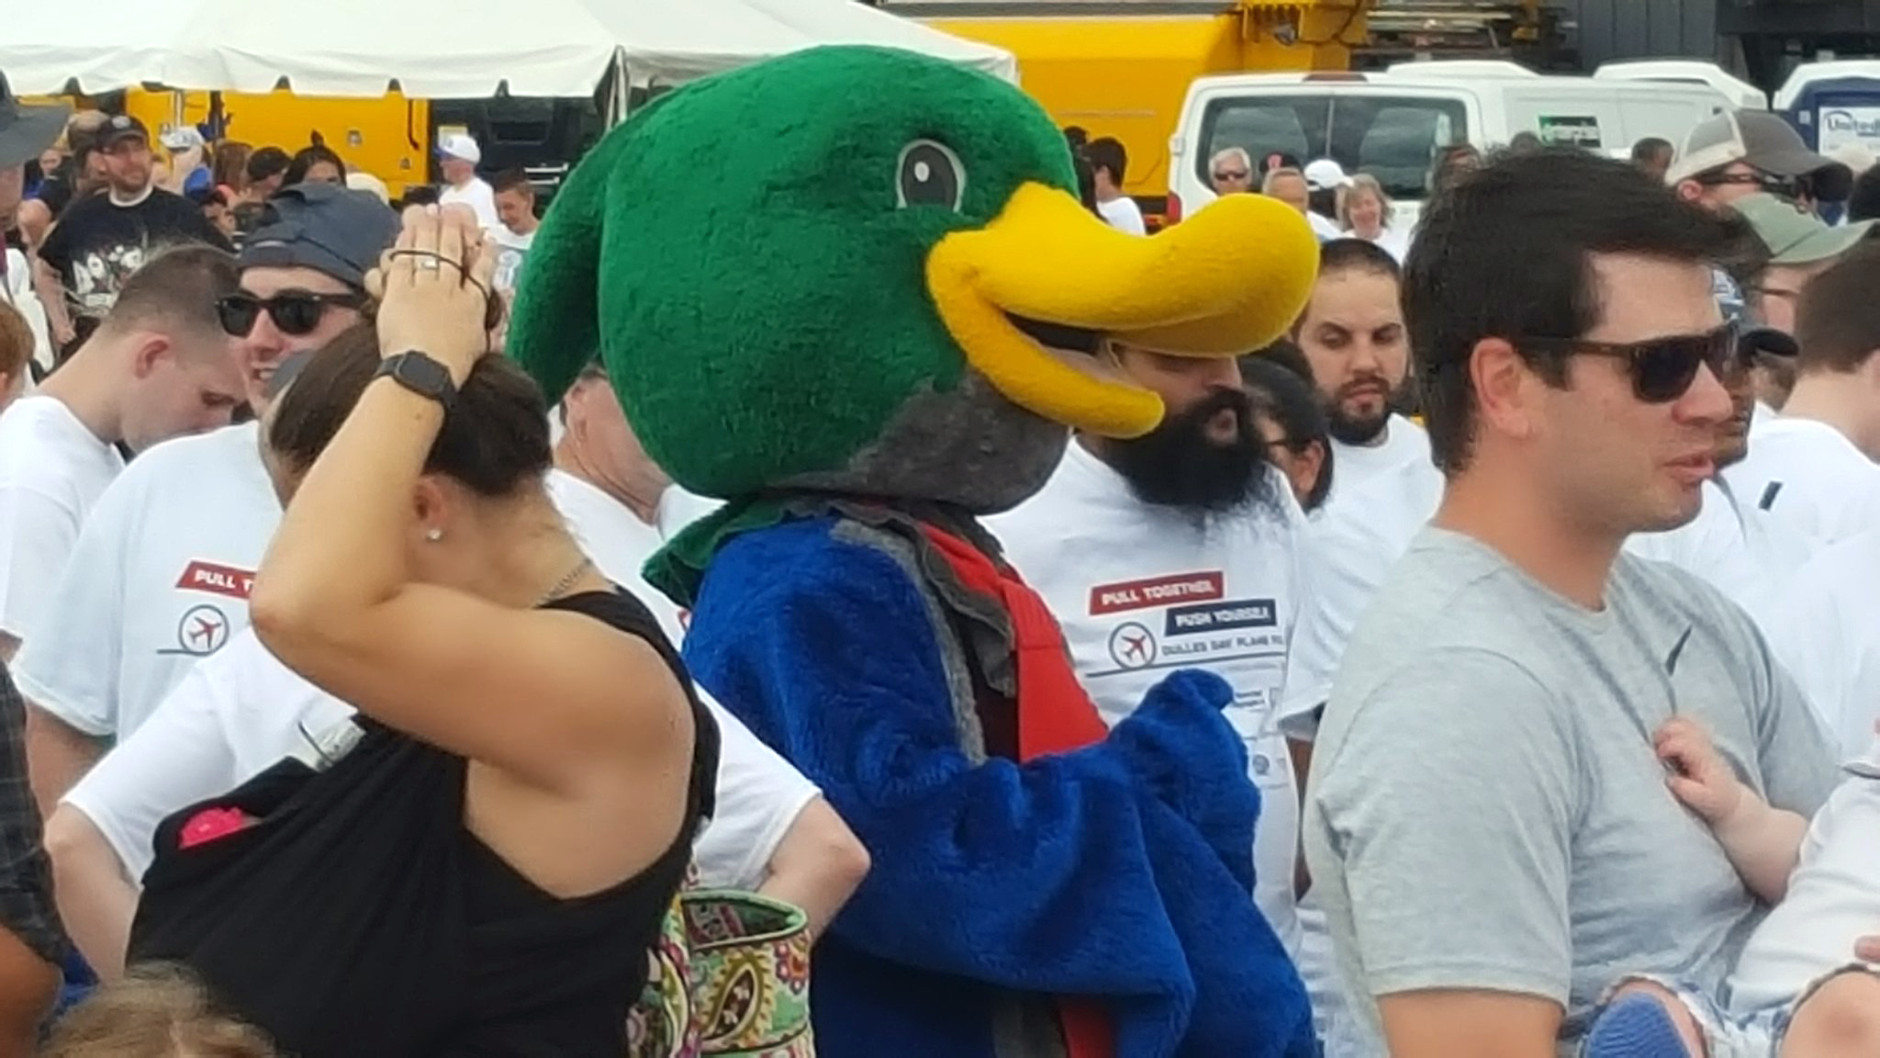 One of several Plane Pull participants -- duck included -- in line at Dulles International Airport on Saturday, Sept. 17, 2016. (WTOP/Ralph Fox)